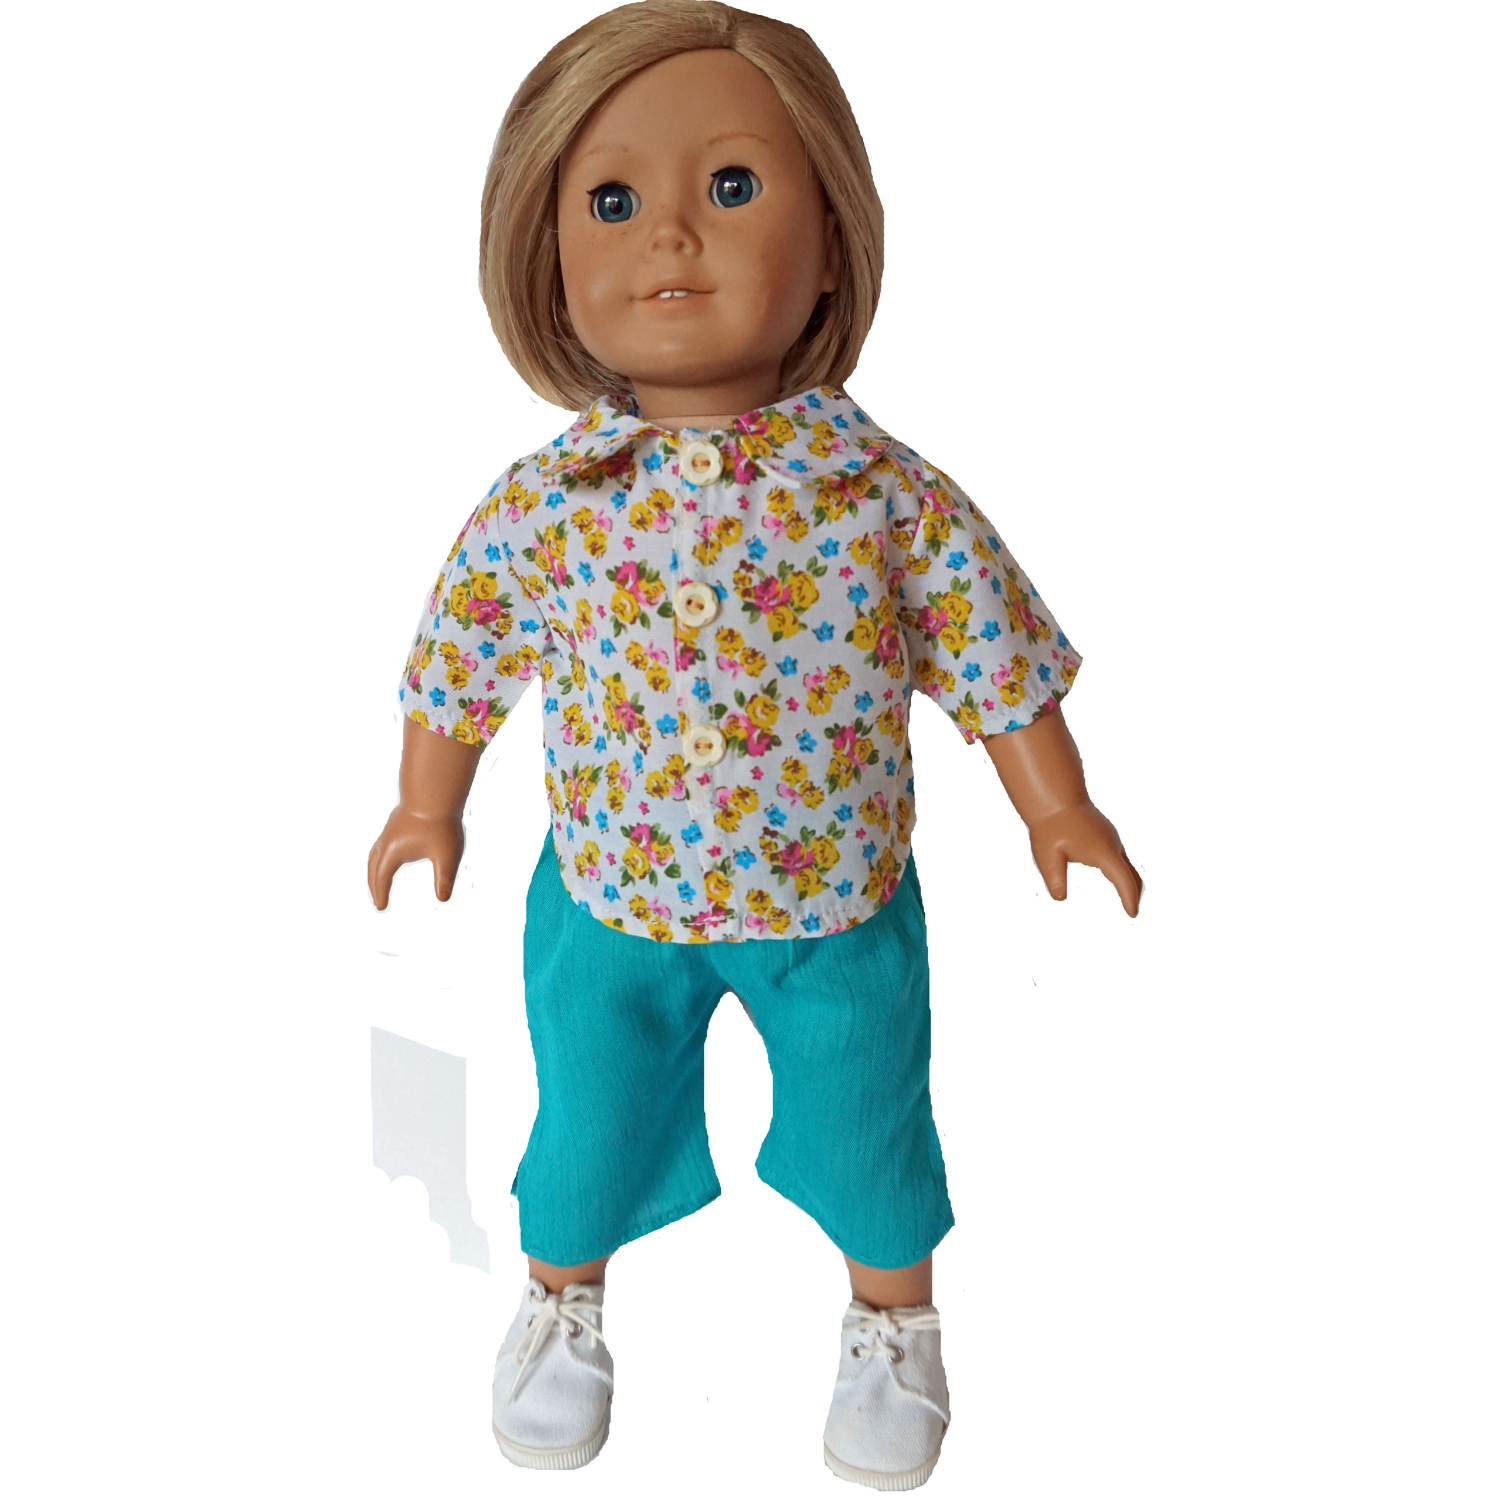 Flower Garden Shirt With Pants For 18 Inch Dolls Like American Girl